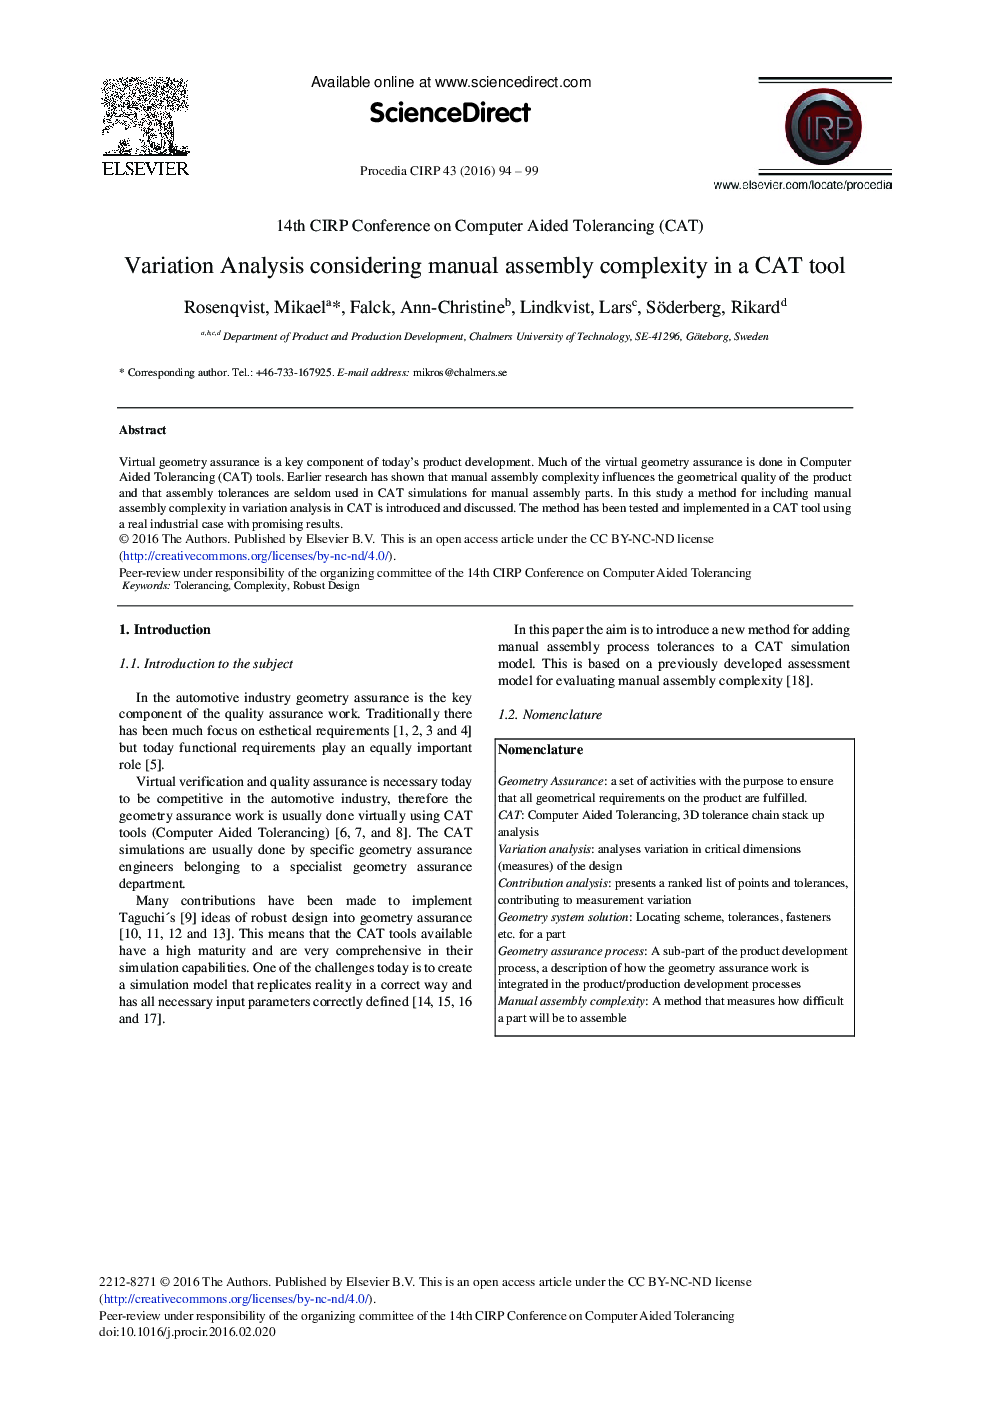 Variation Analysis Considering Manual Assembly Complexity in a CAT Tool 